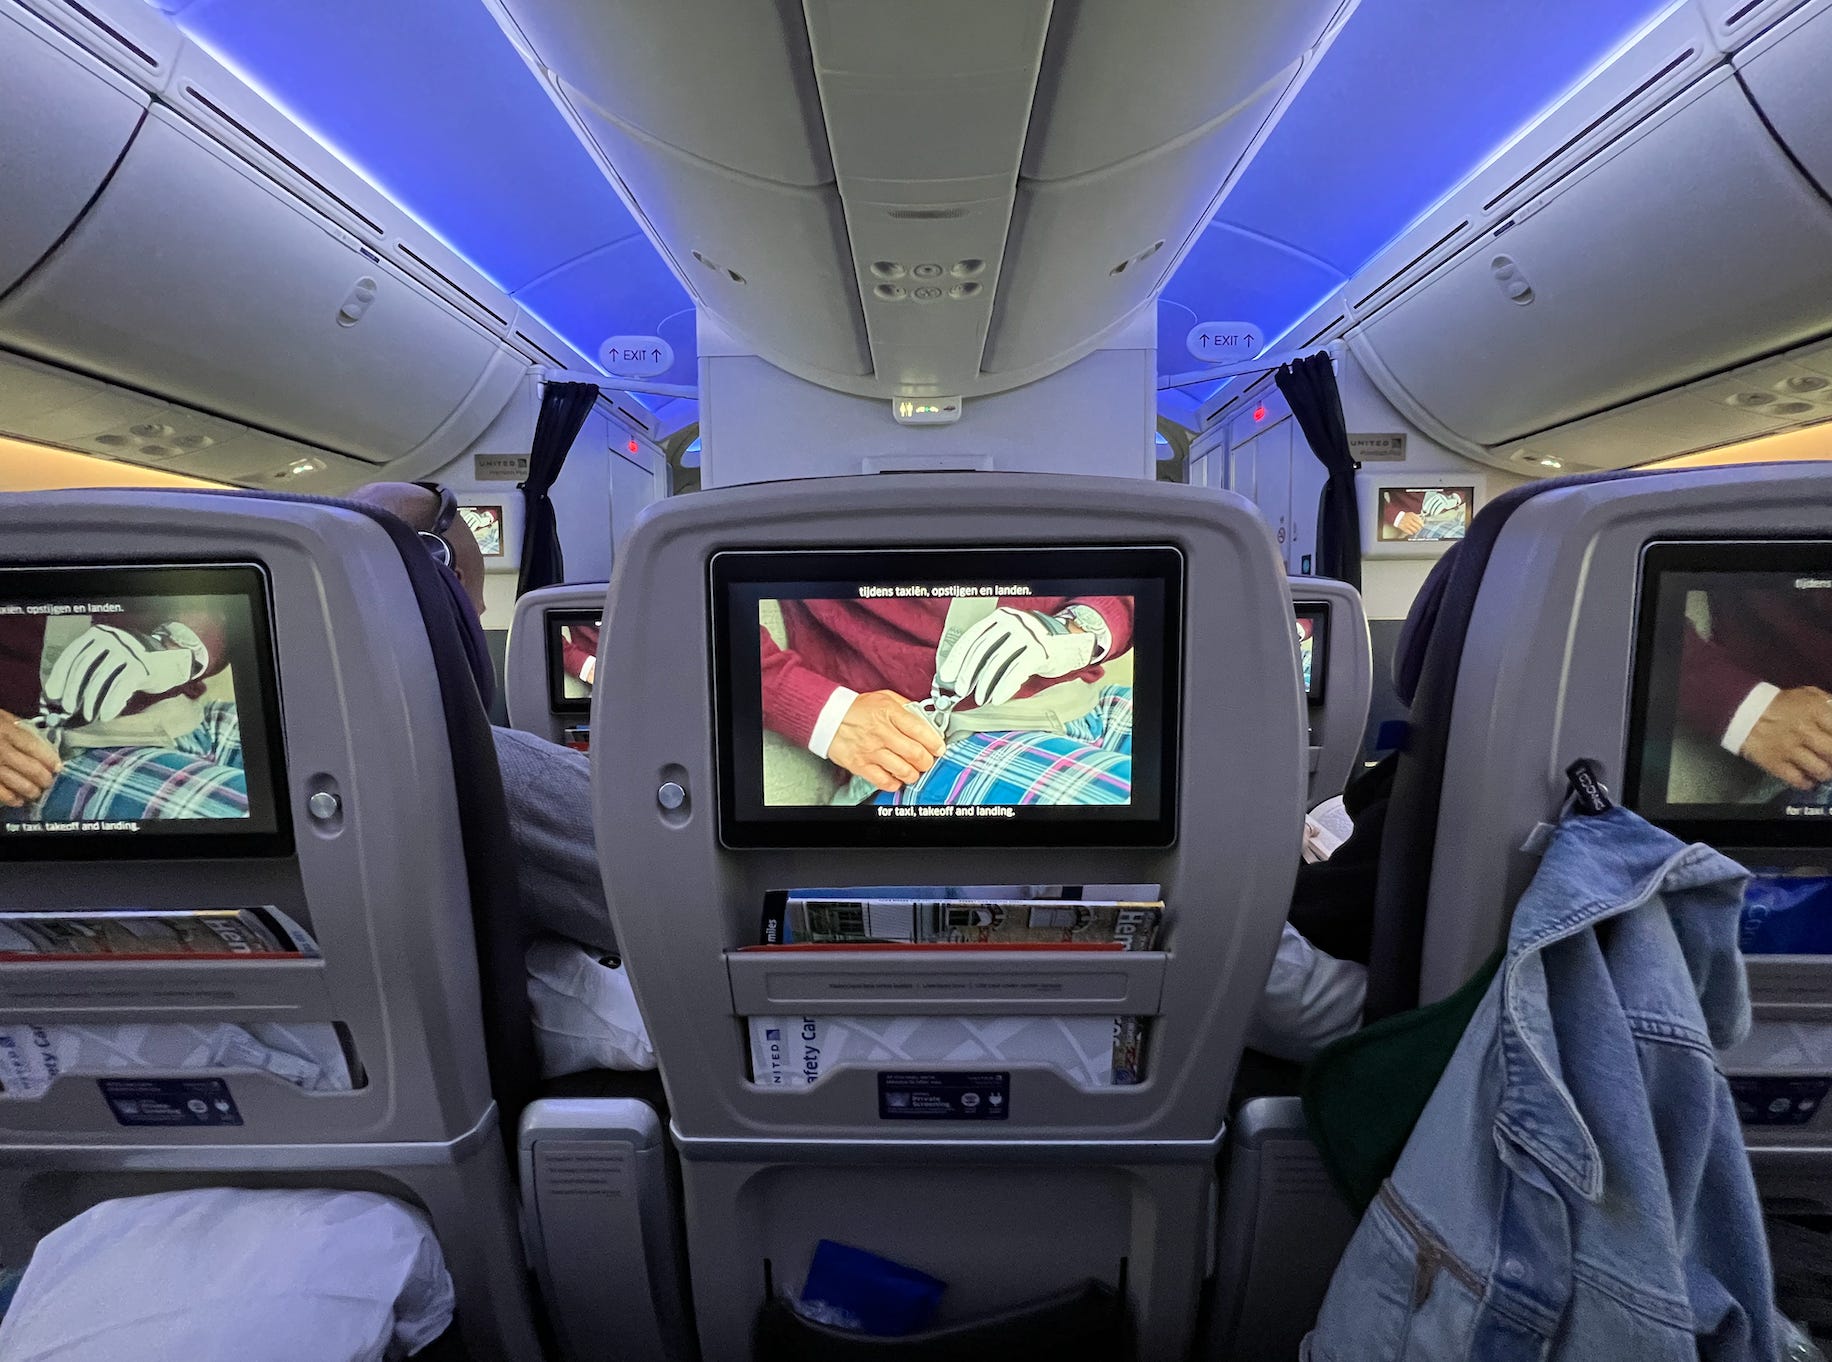 United Airlines Introduces Personalized In-Flight Ads